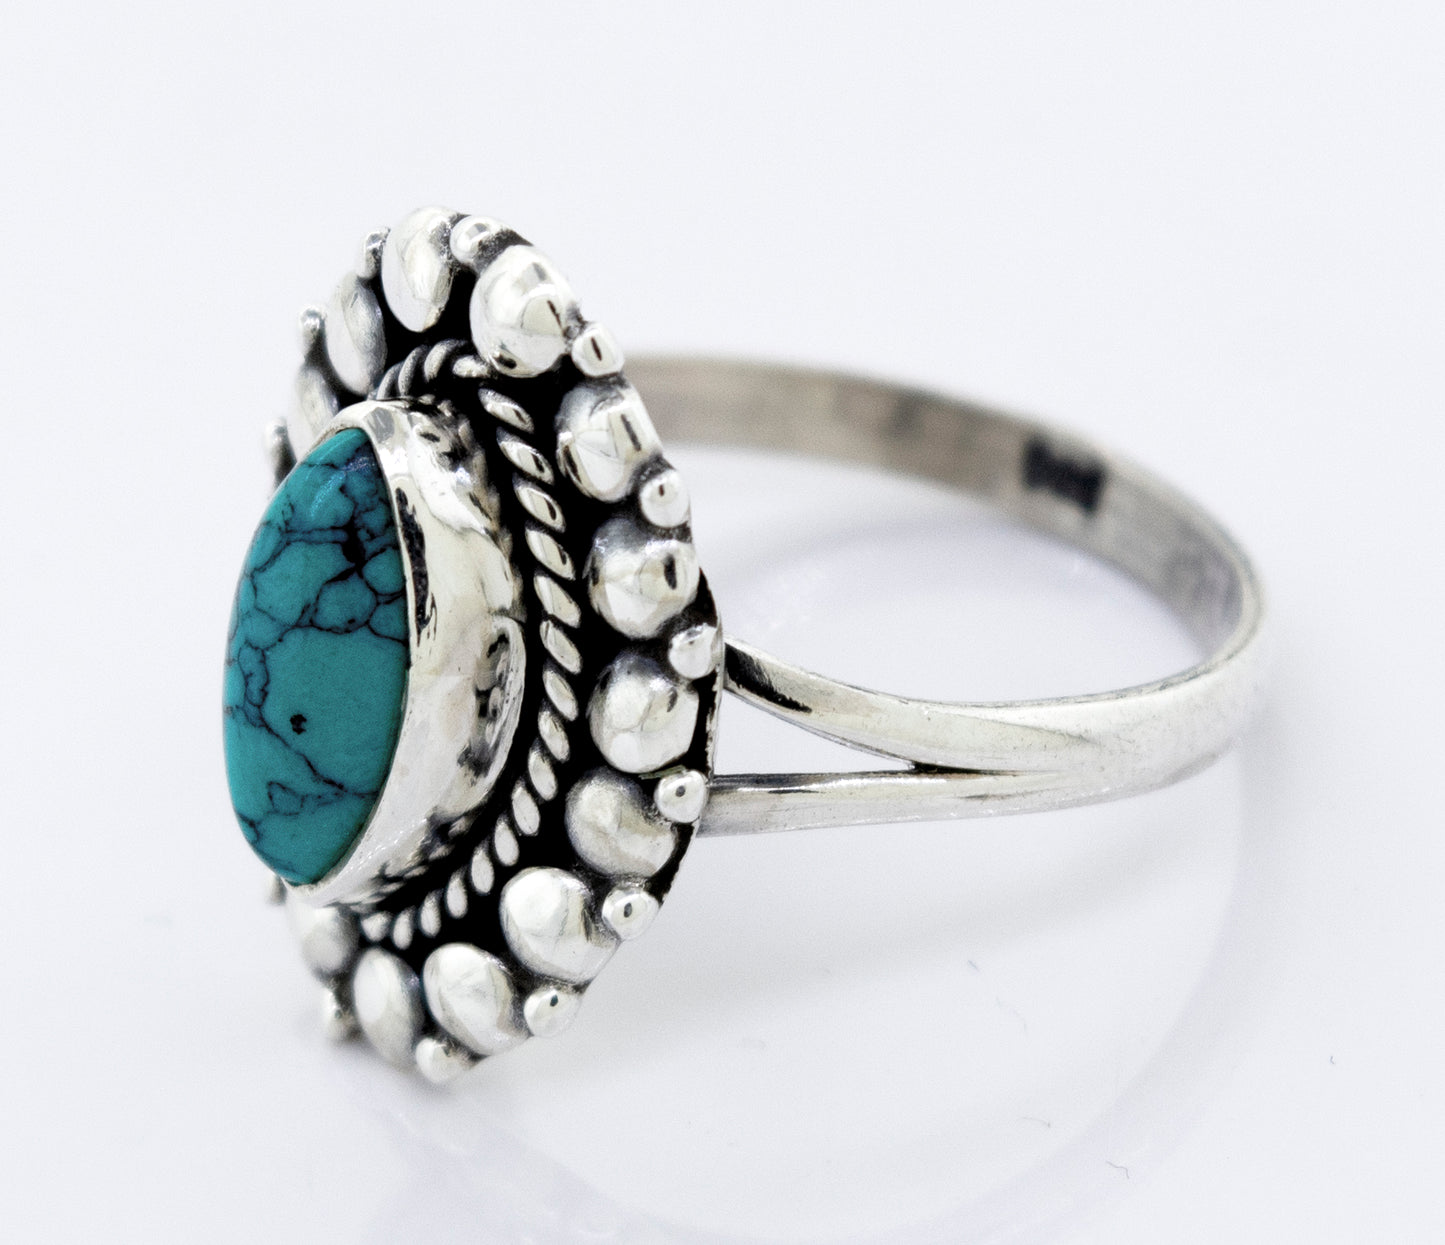 A Super Silver ring with a Marquise Shaped Vibrant Turquoise Stone.